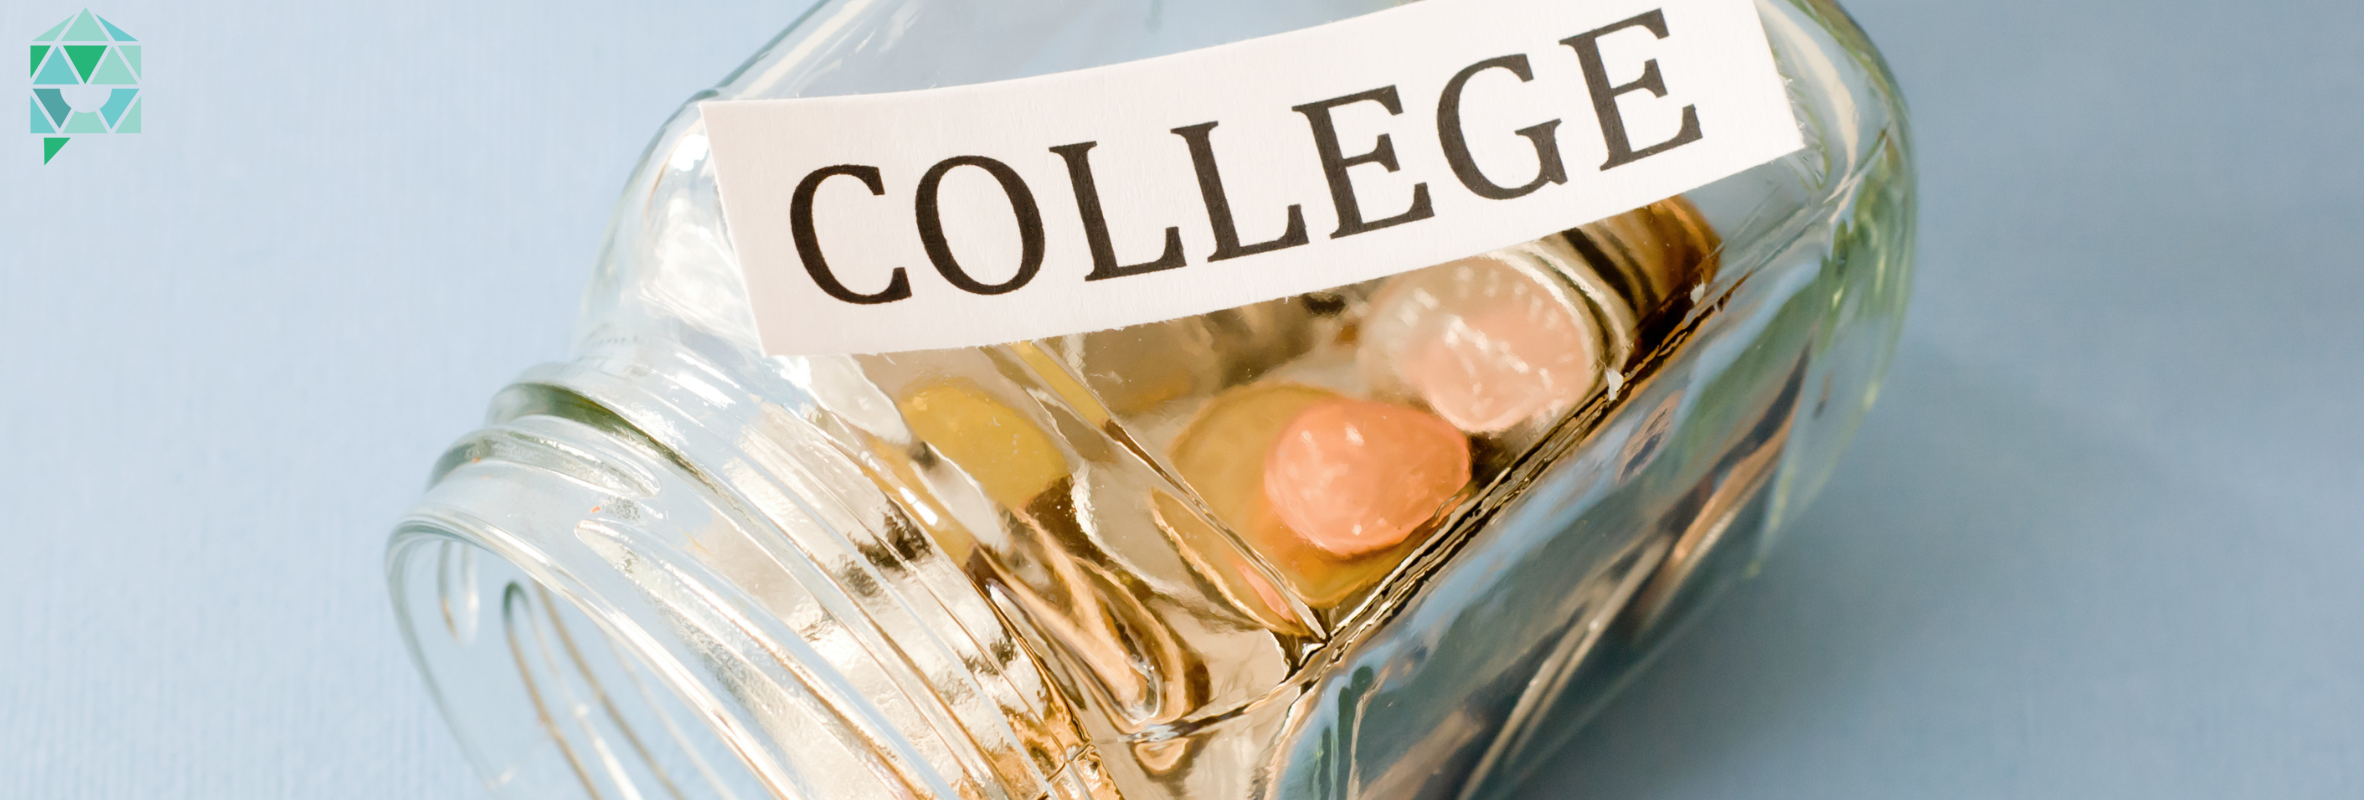 A glass jar filled with coins and bills of different currencies labeled with the word “college”. The image represents the idea of saving money for college education, which can be expensive and challenging for many students.